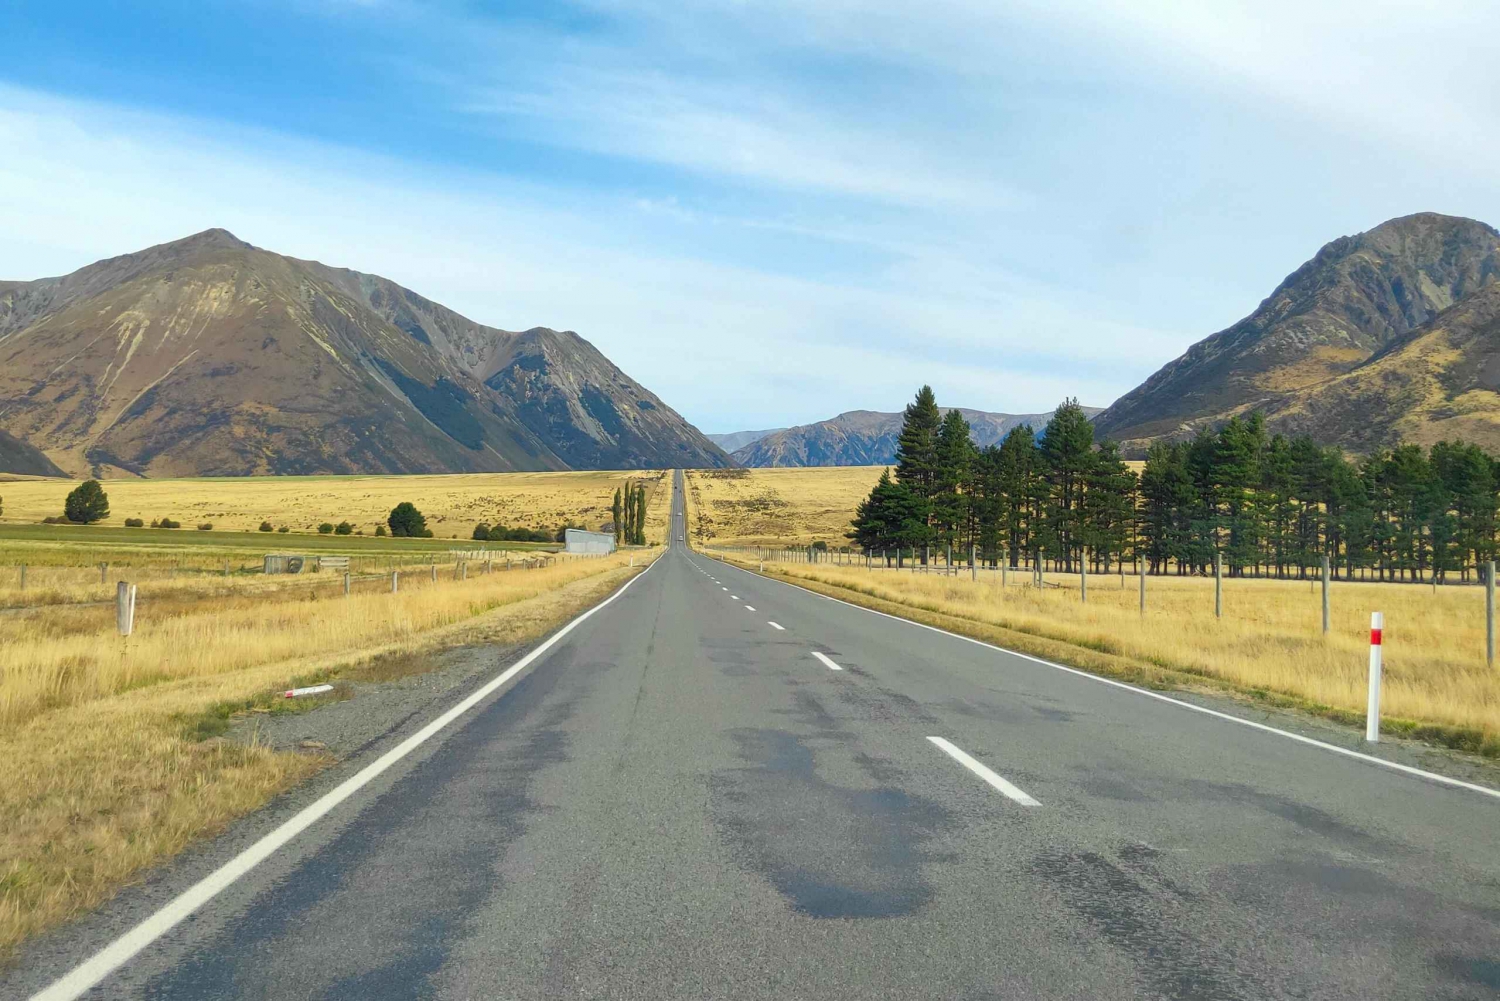 South Island New Zealand: Private Car Hire with Driver